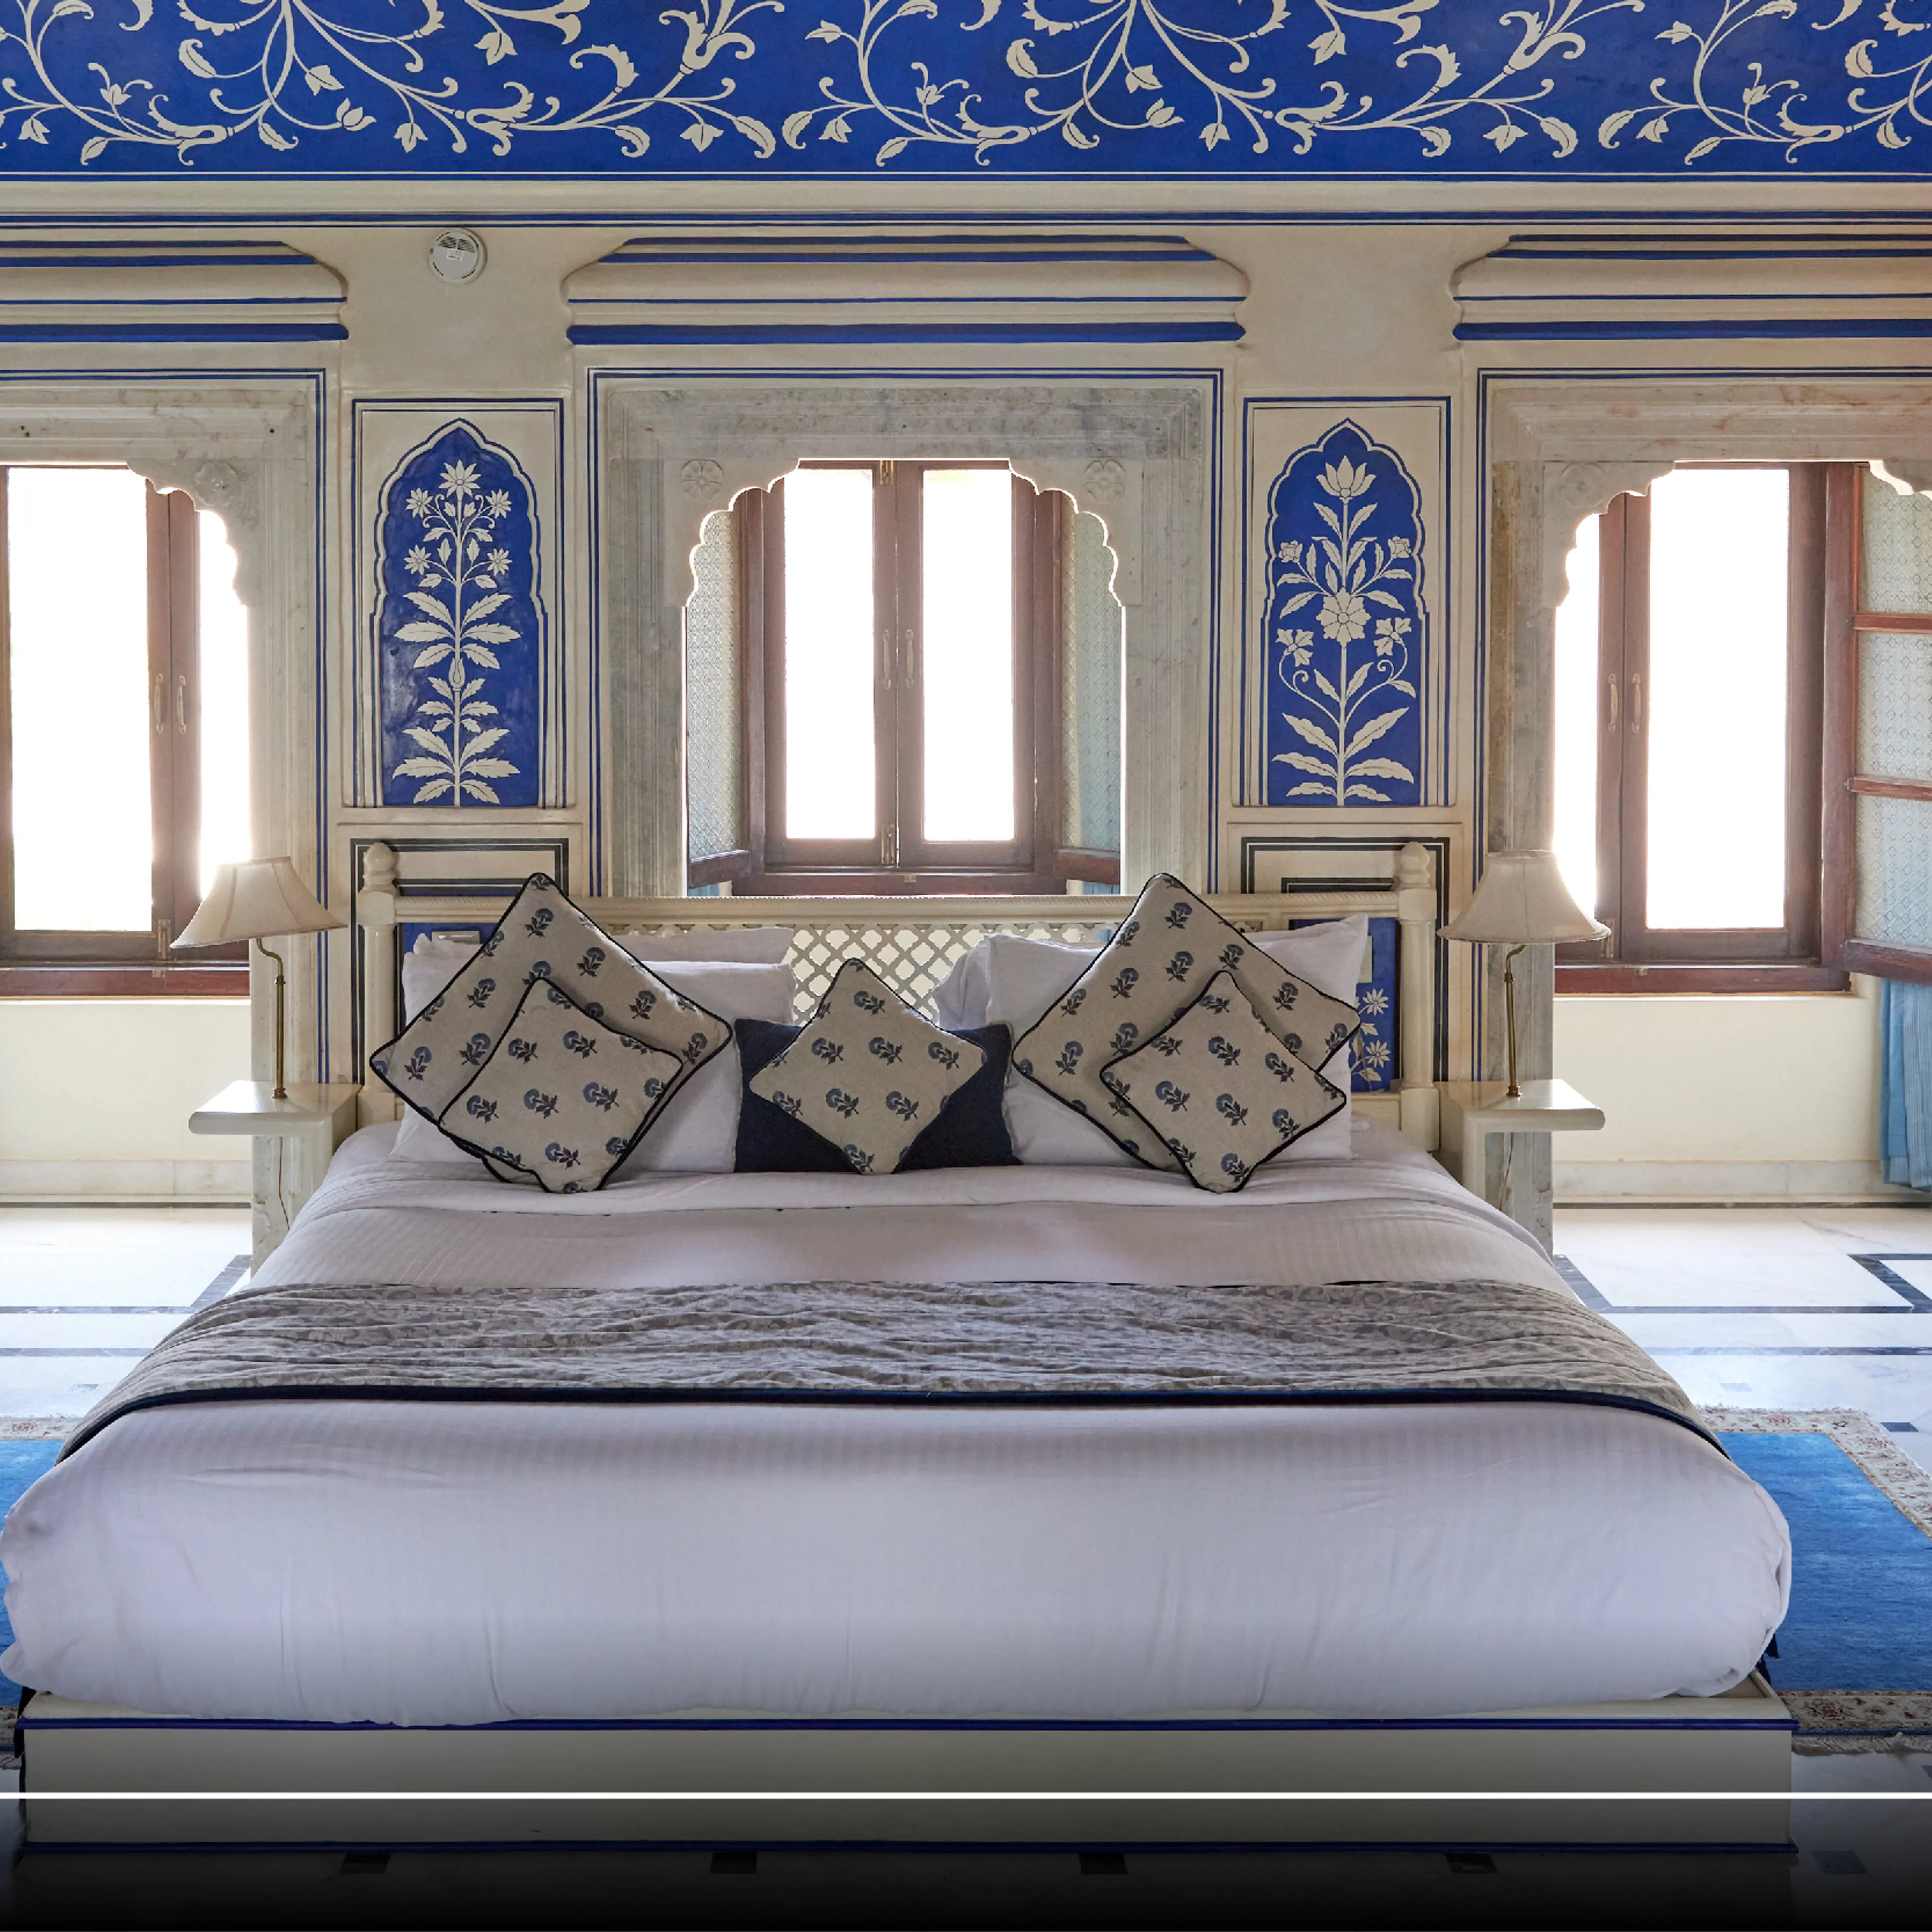 Immerse in history and regality at this ancient haveli in Jaipur